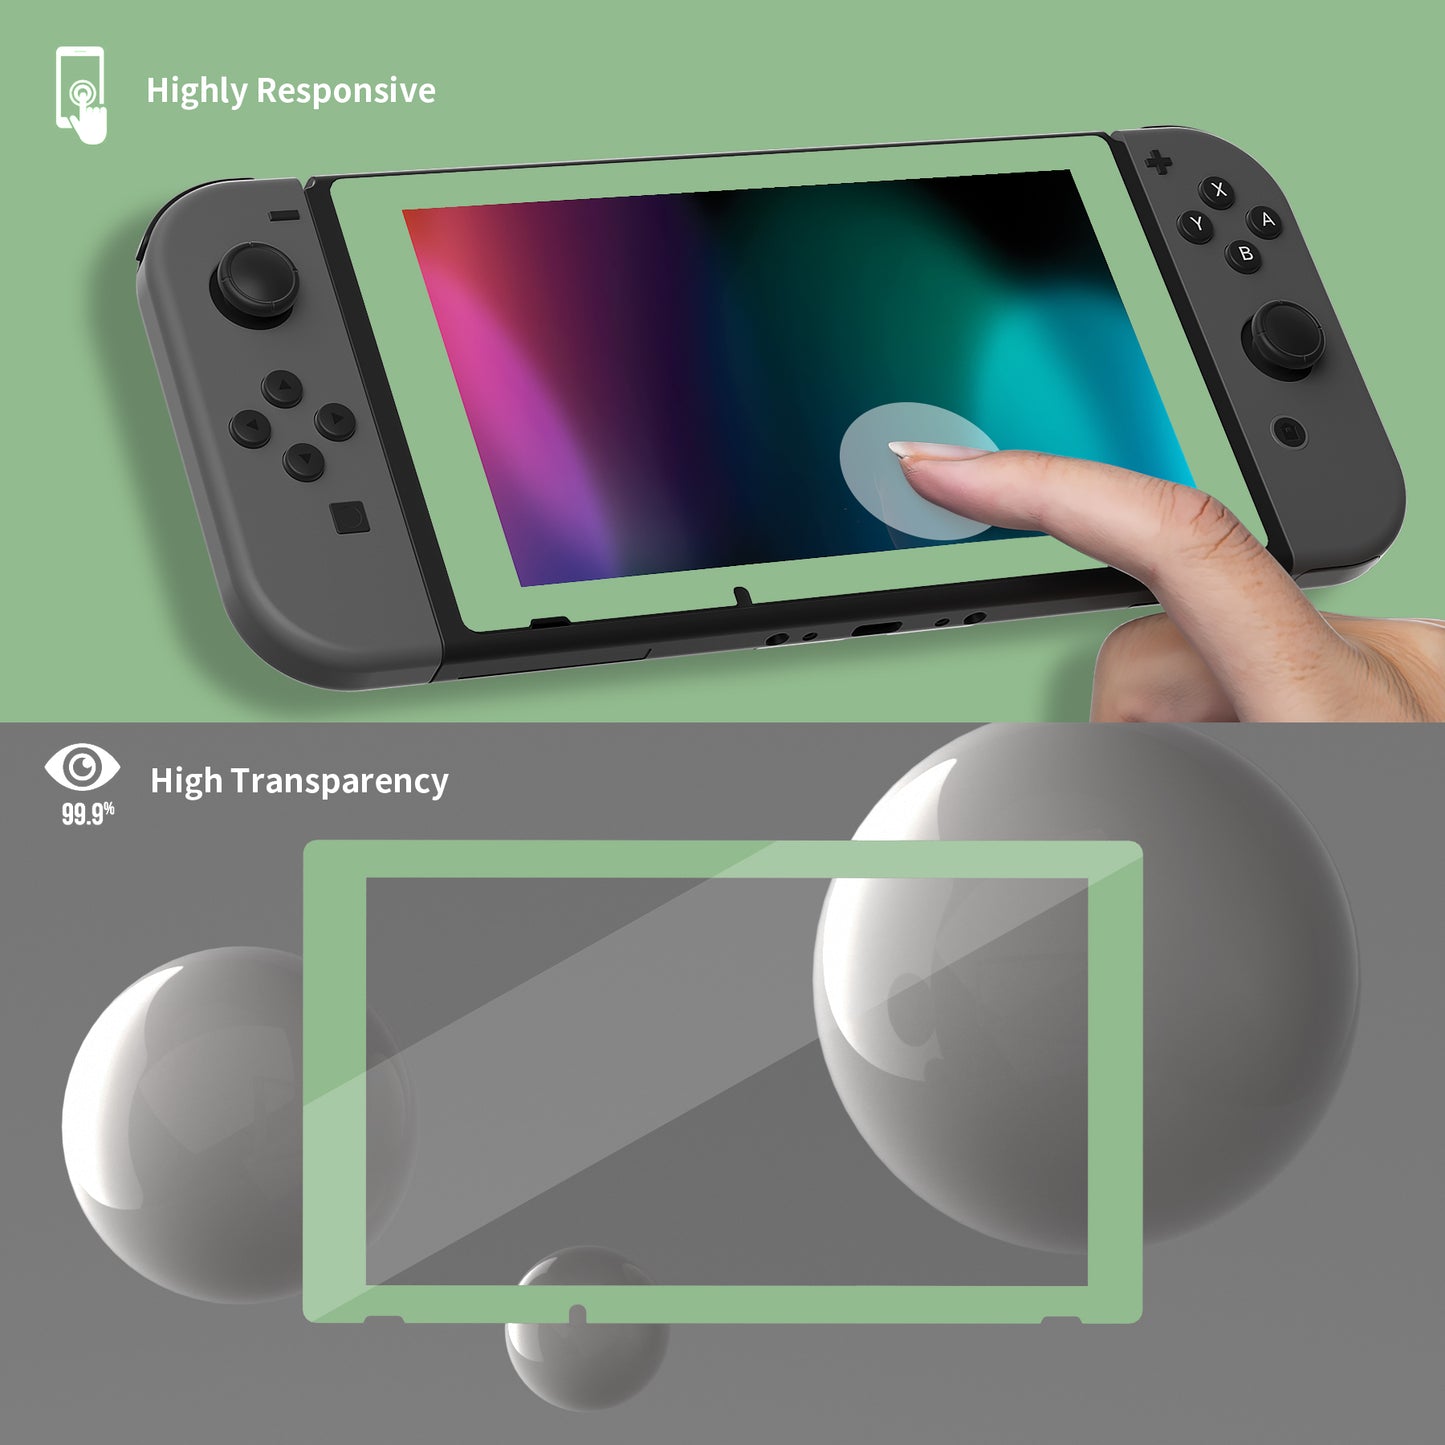 2 Pack Matcha Green Border Transparent HD Clear Saver Protector Film, Tempered Glass Screen Protector for Nintendo Switch [Anti-Scratch, Anti-Fingerprint, Shatterproof, Bubble-Free] - NSPJ0708 playvital